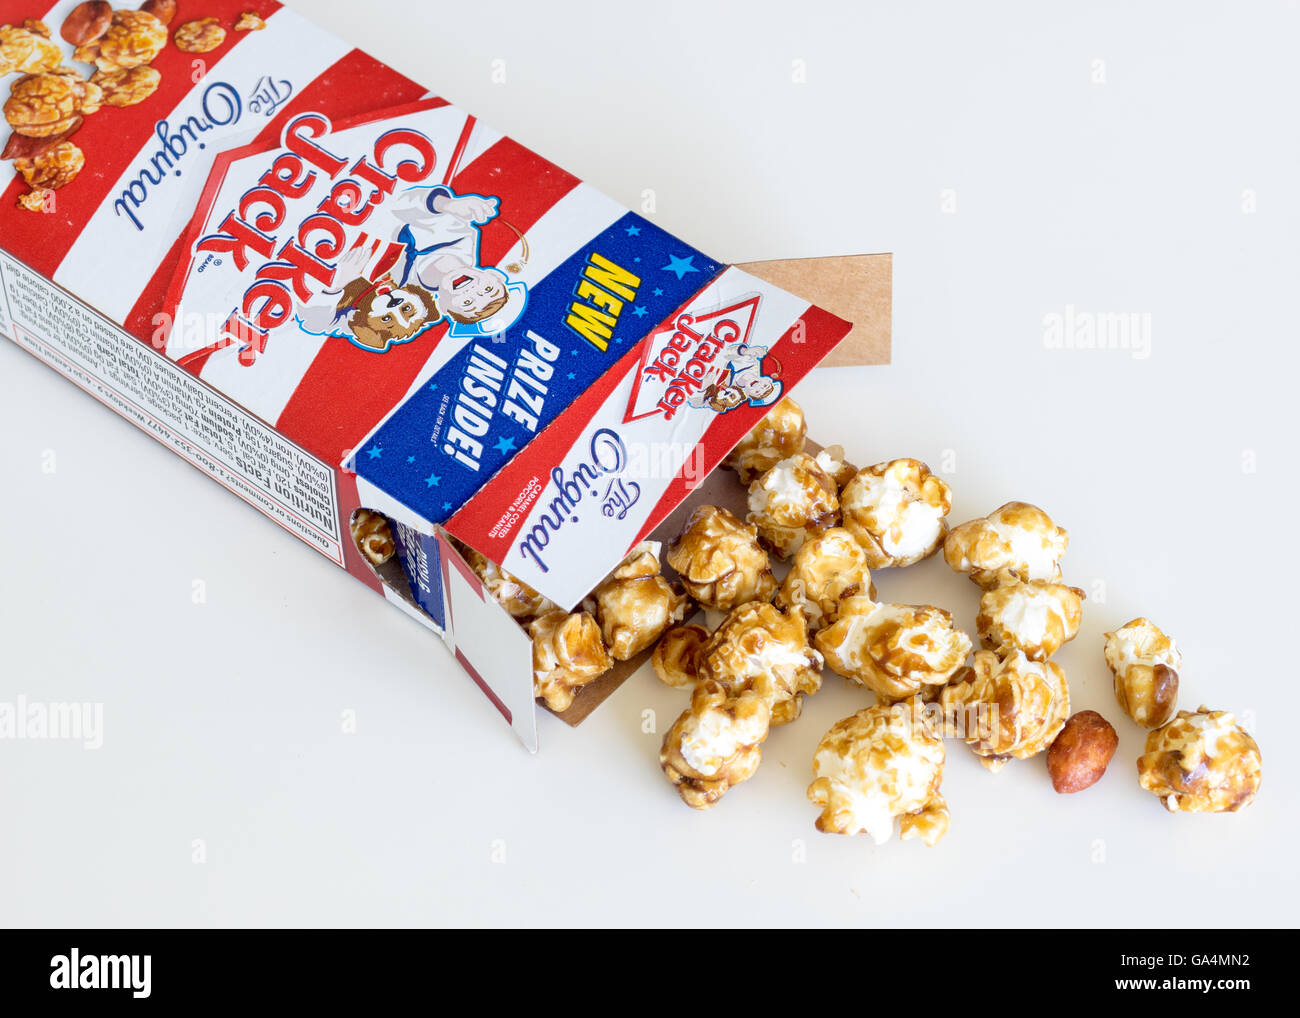 A box of Cracker Jack, an American snack consisting of molasses-flavoured caramel-coated popcorn and peanuts. Stock Photo